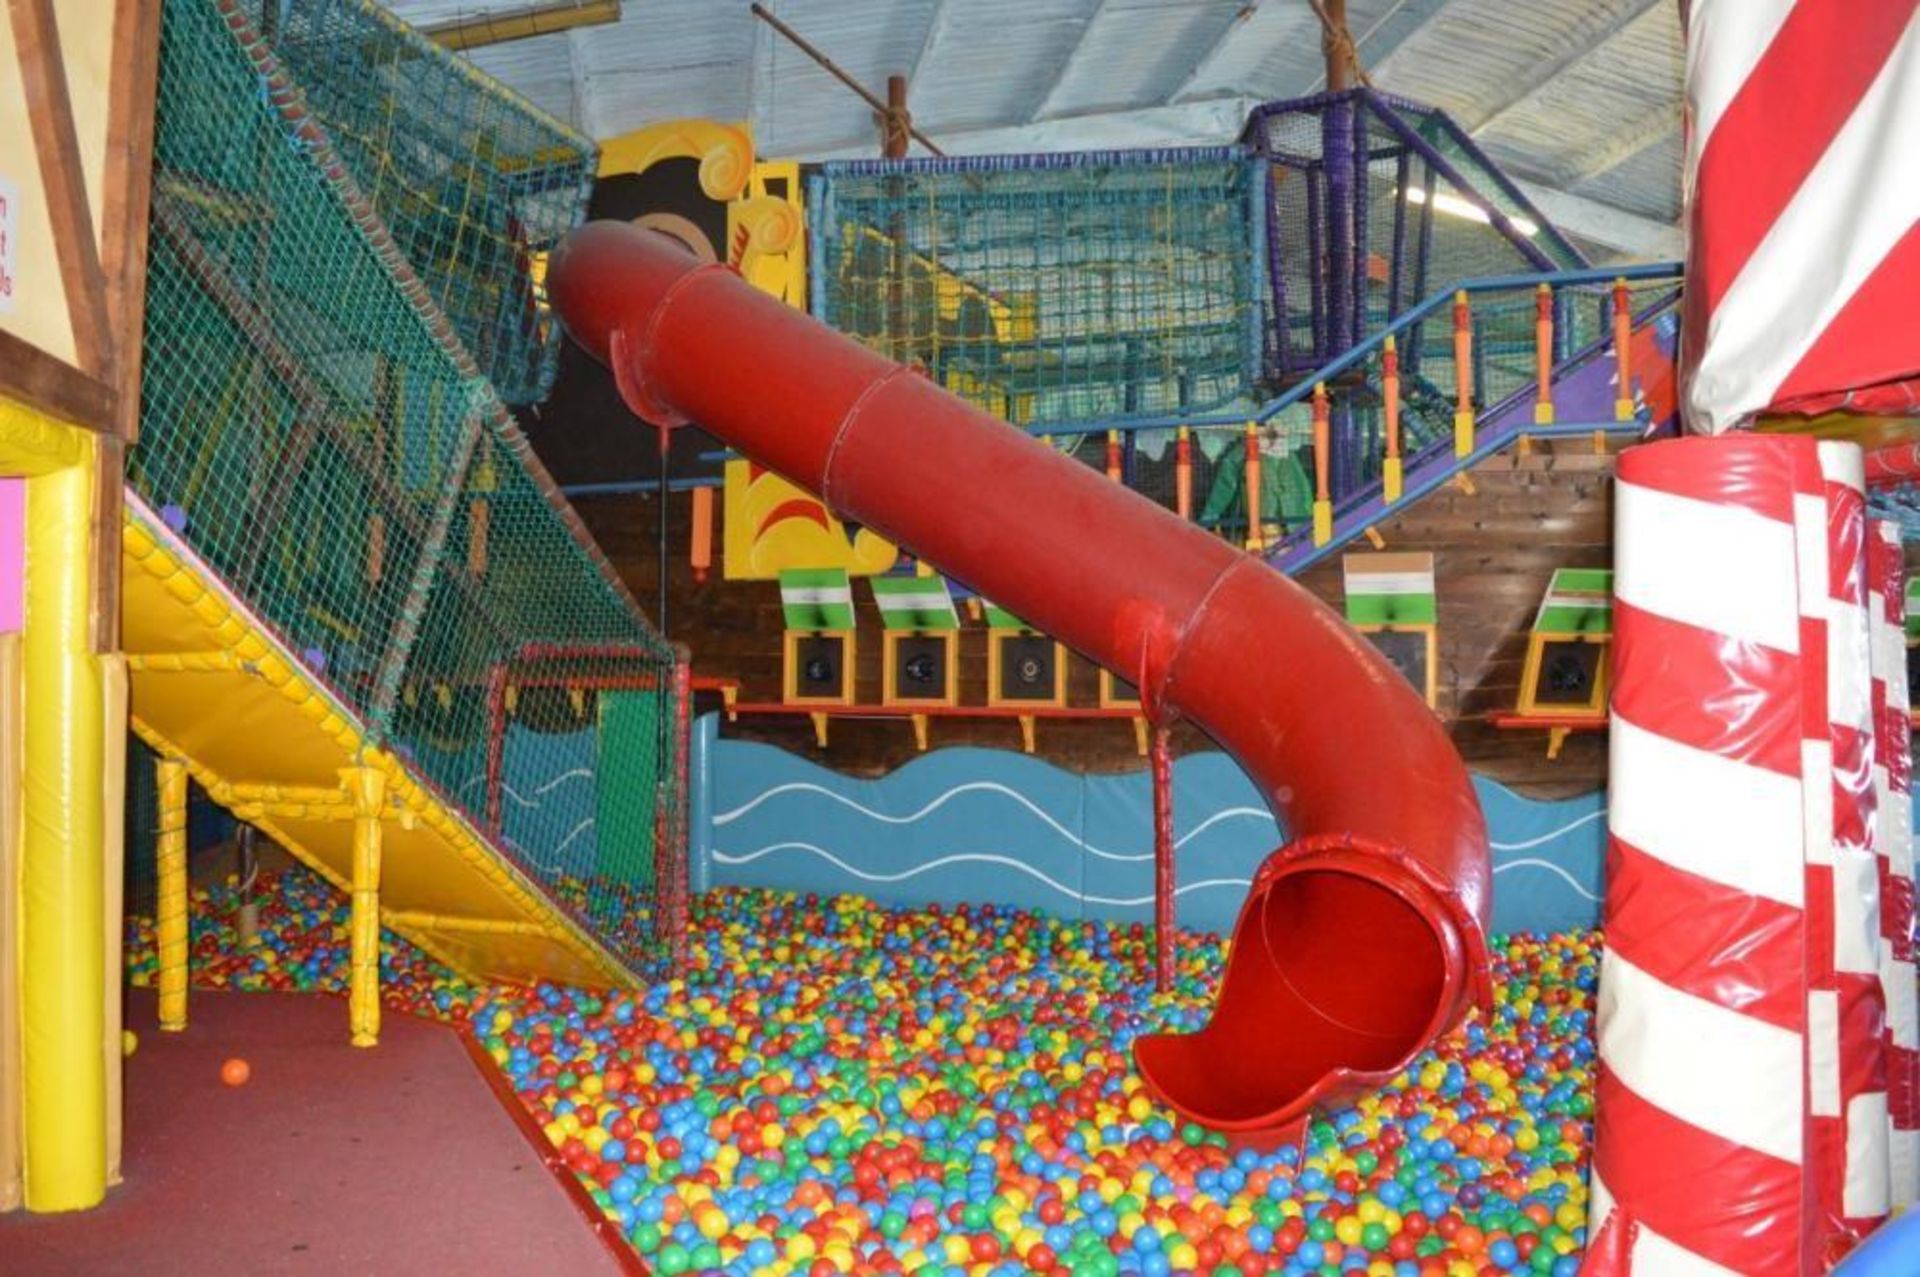 Puddletown Pirates Childrens Play Centre - Features Large Indoor Ball Pit, Huge Amount of Balls, Fun - Image 18 of 30